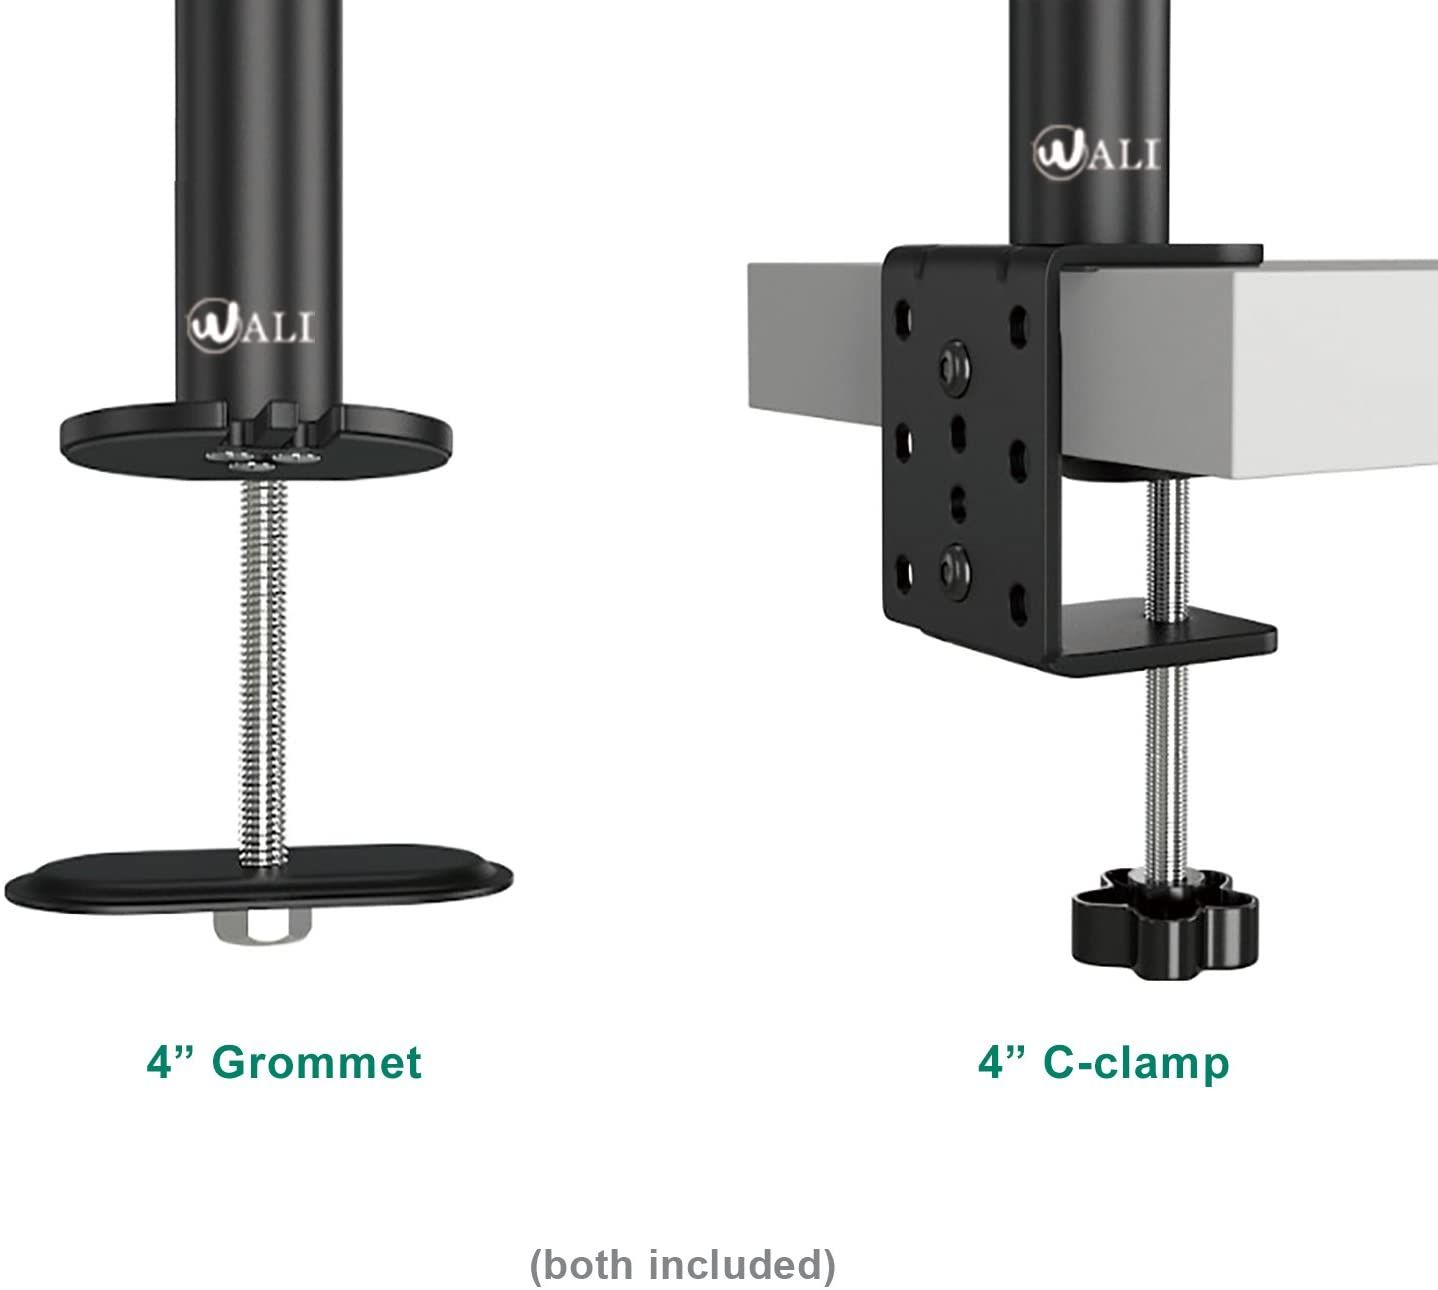 WALI Triple Monitor Desk Mount Stand M003 Mounting Options